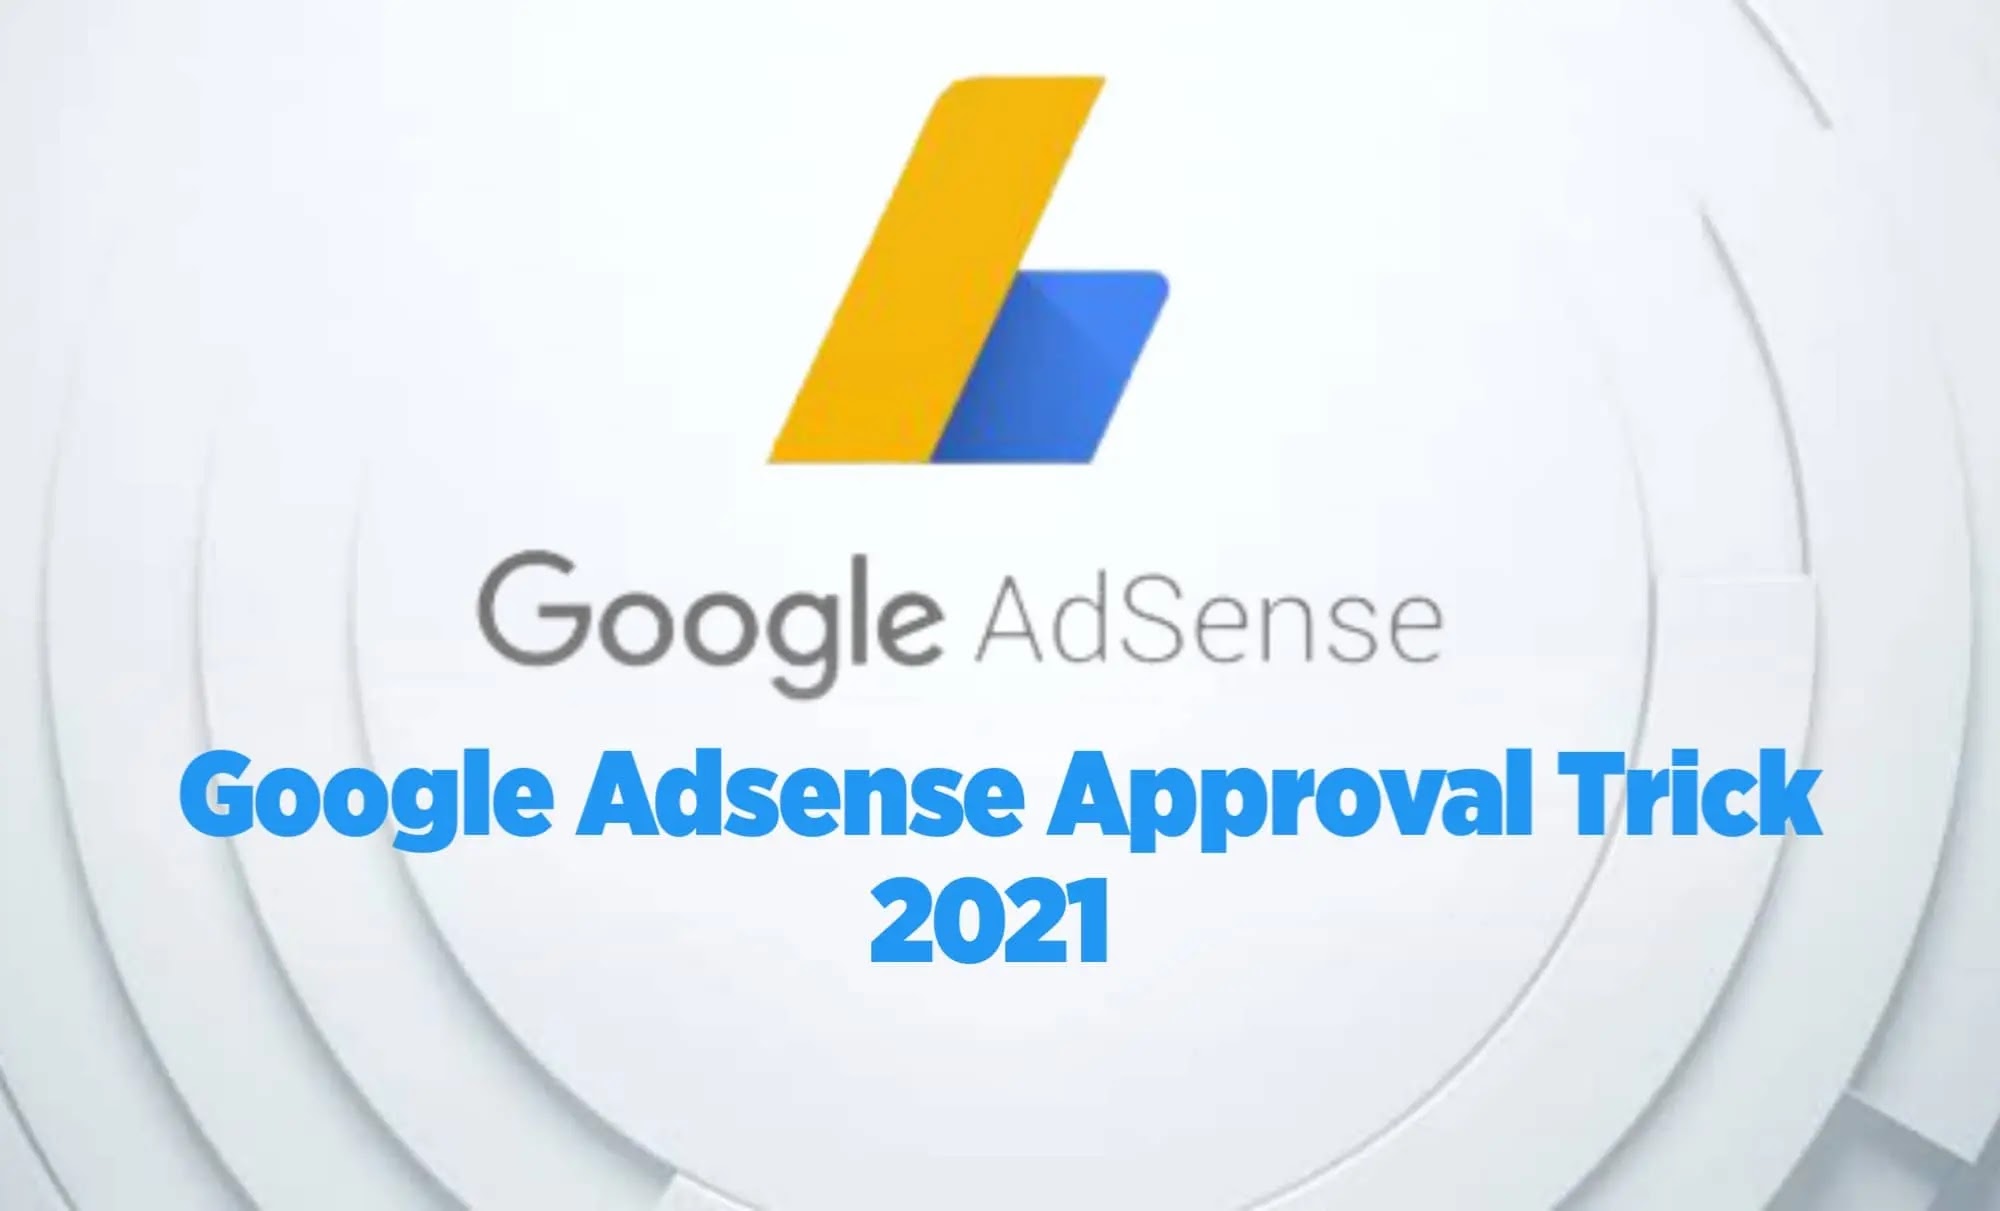 How to Get Fast AdSense Approval in 2022